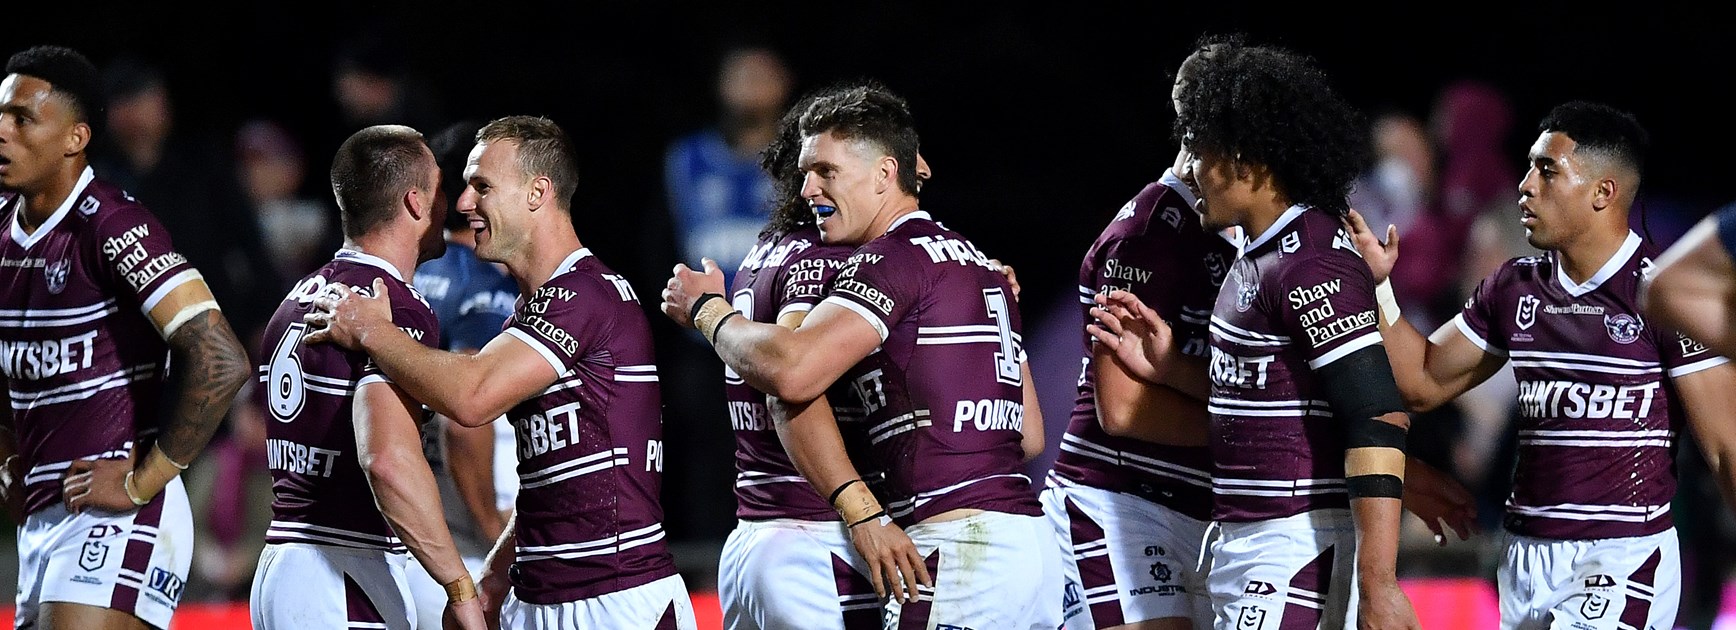 Sea Eagles feature strongly in representative matches